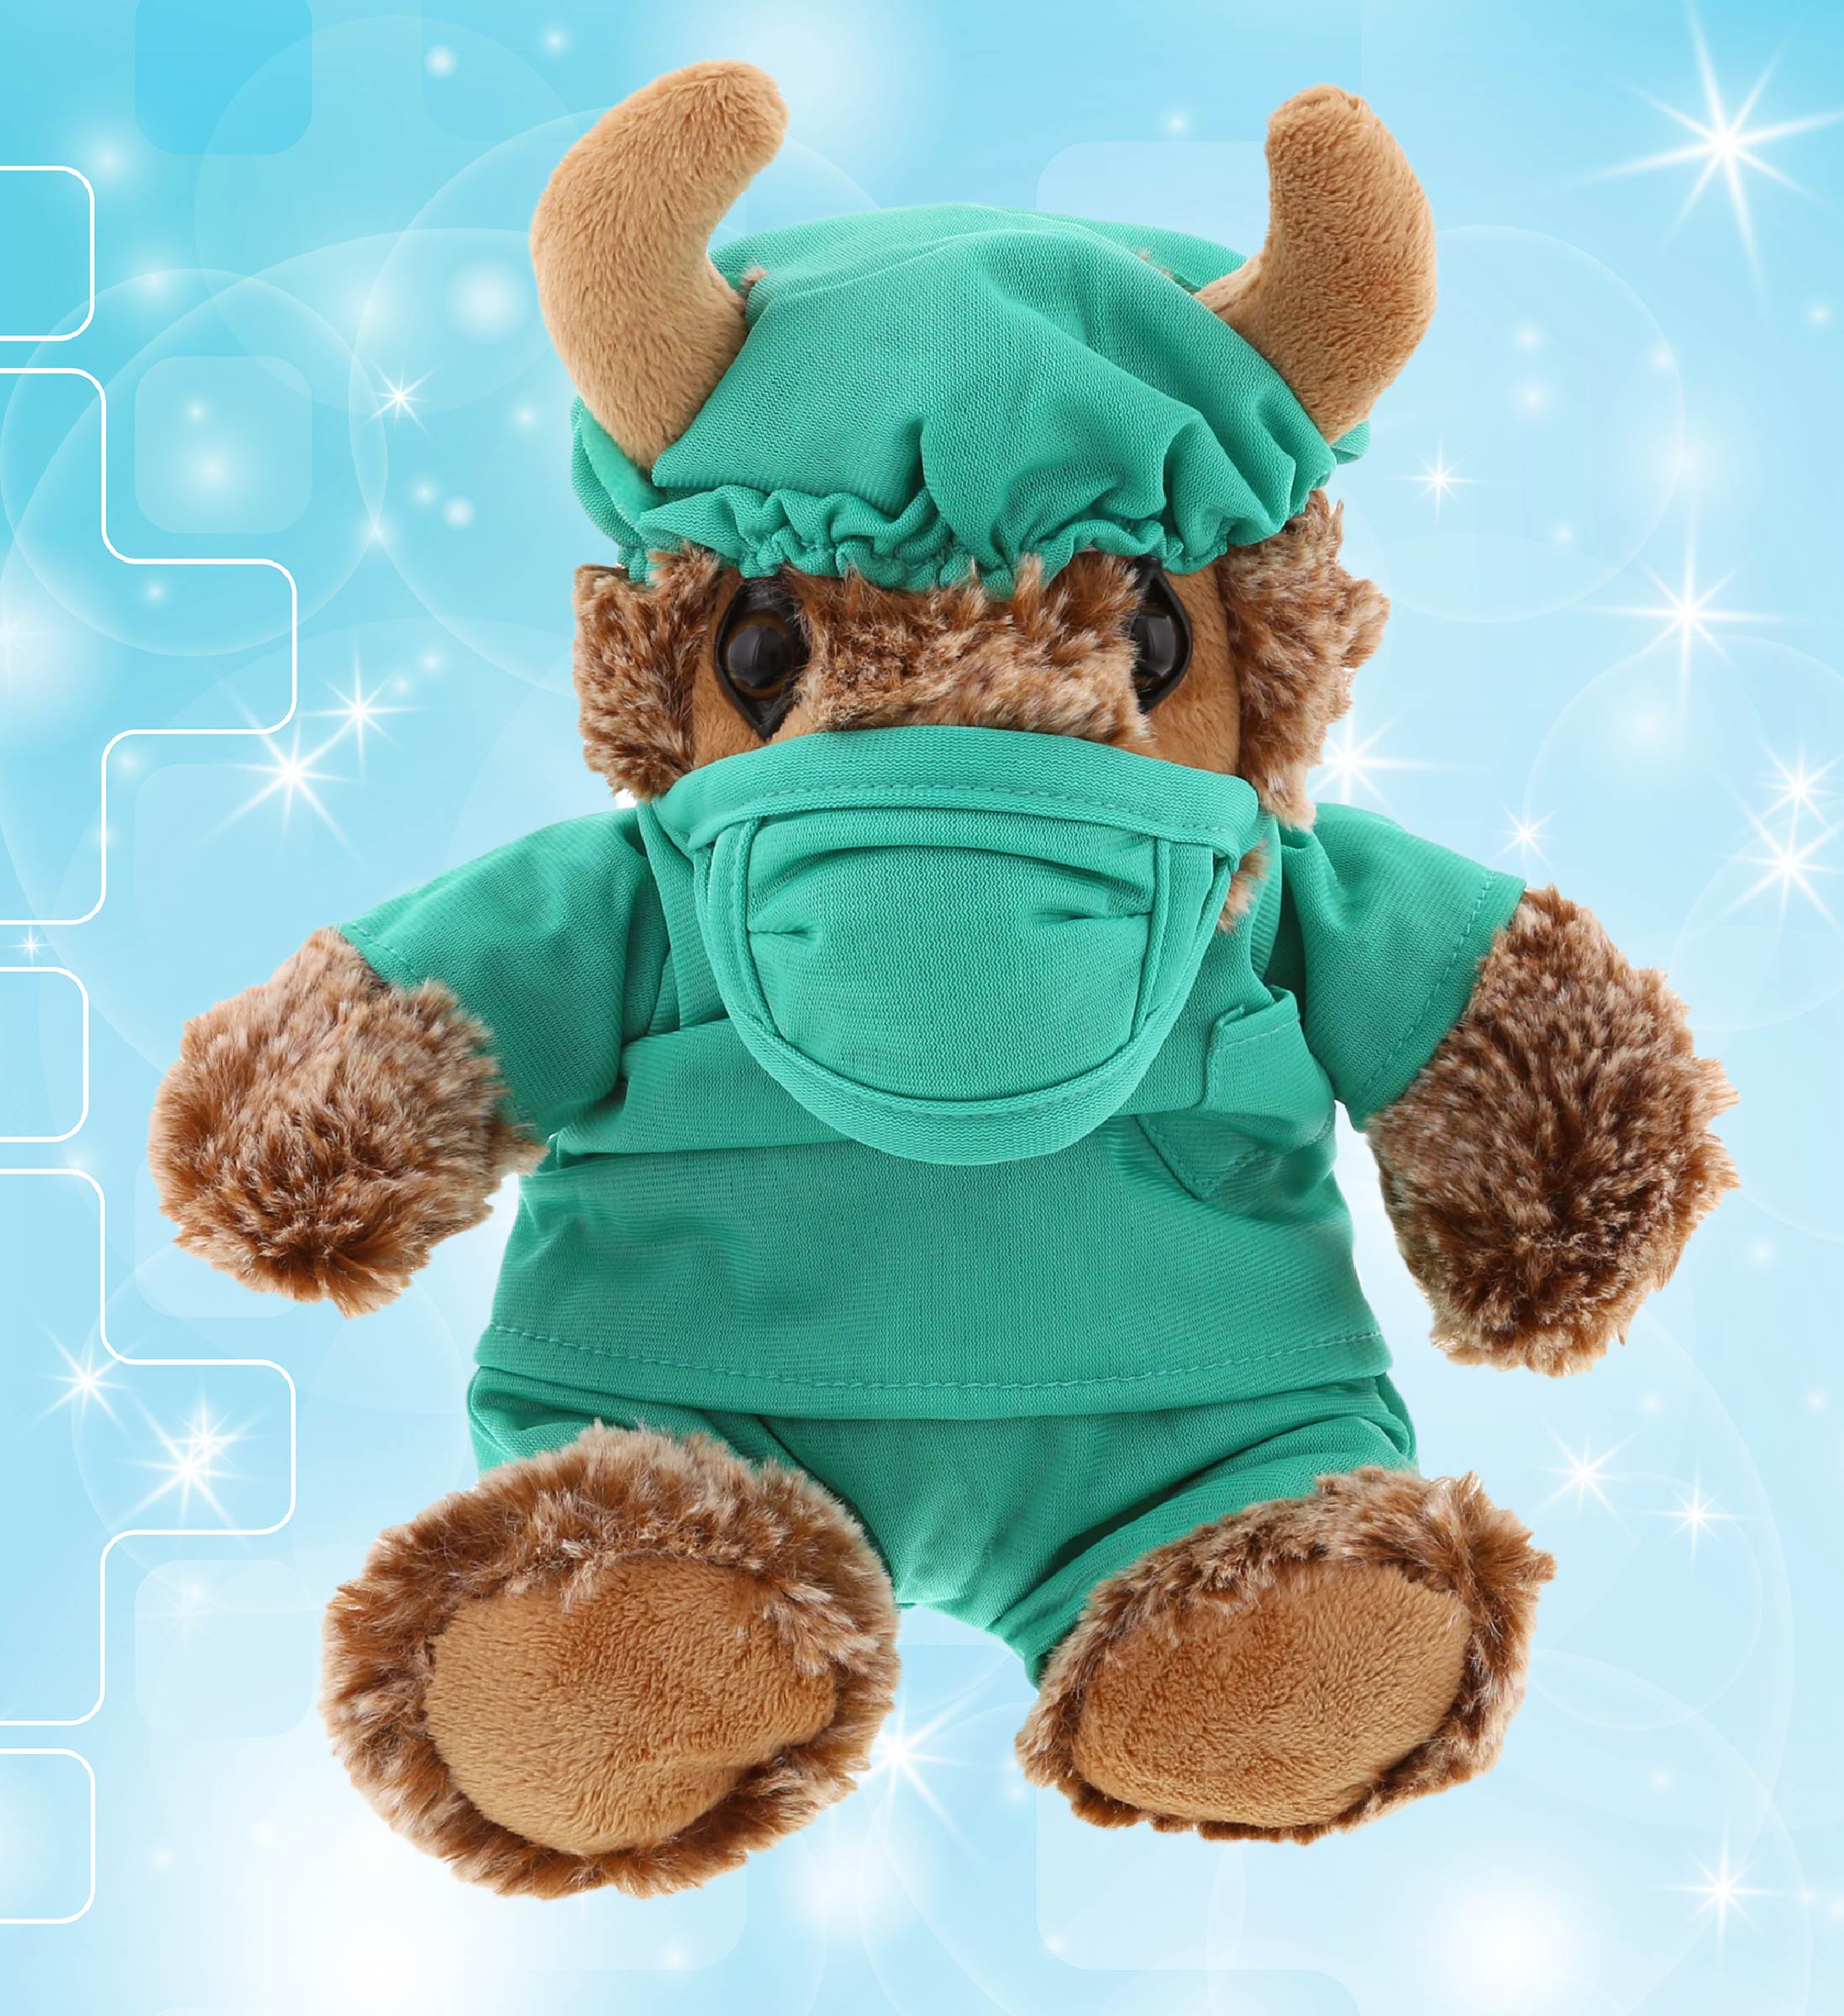 DolliBu Doctor Dress Up Set for Teddy Bear Plush Toy - Surgeon Scrubs Outfit  for Stuffed Animals, Cute Set of Doctor Cap, Shirt, Pants, & Mask for Teddy  Bear Costume, Stuffed Animal